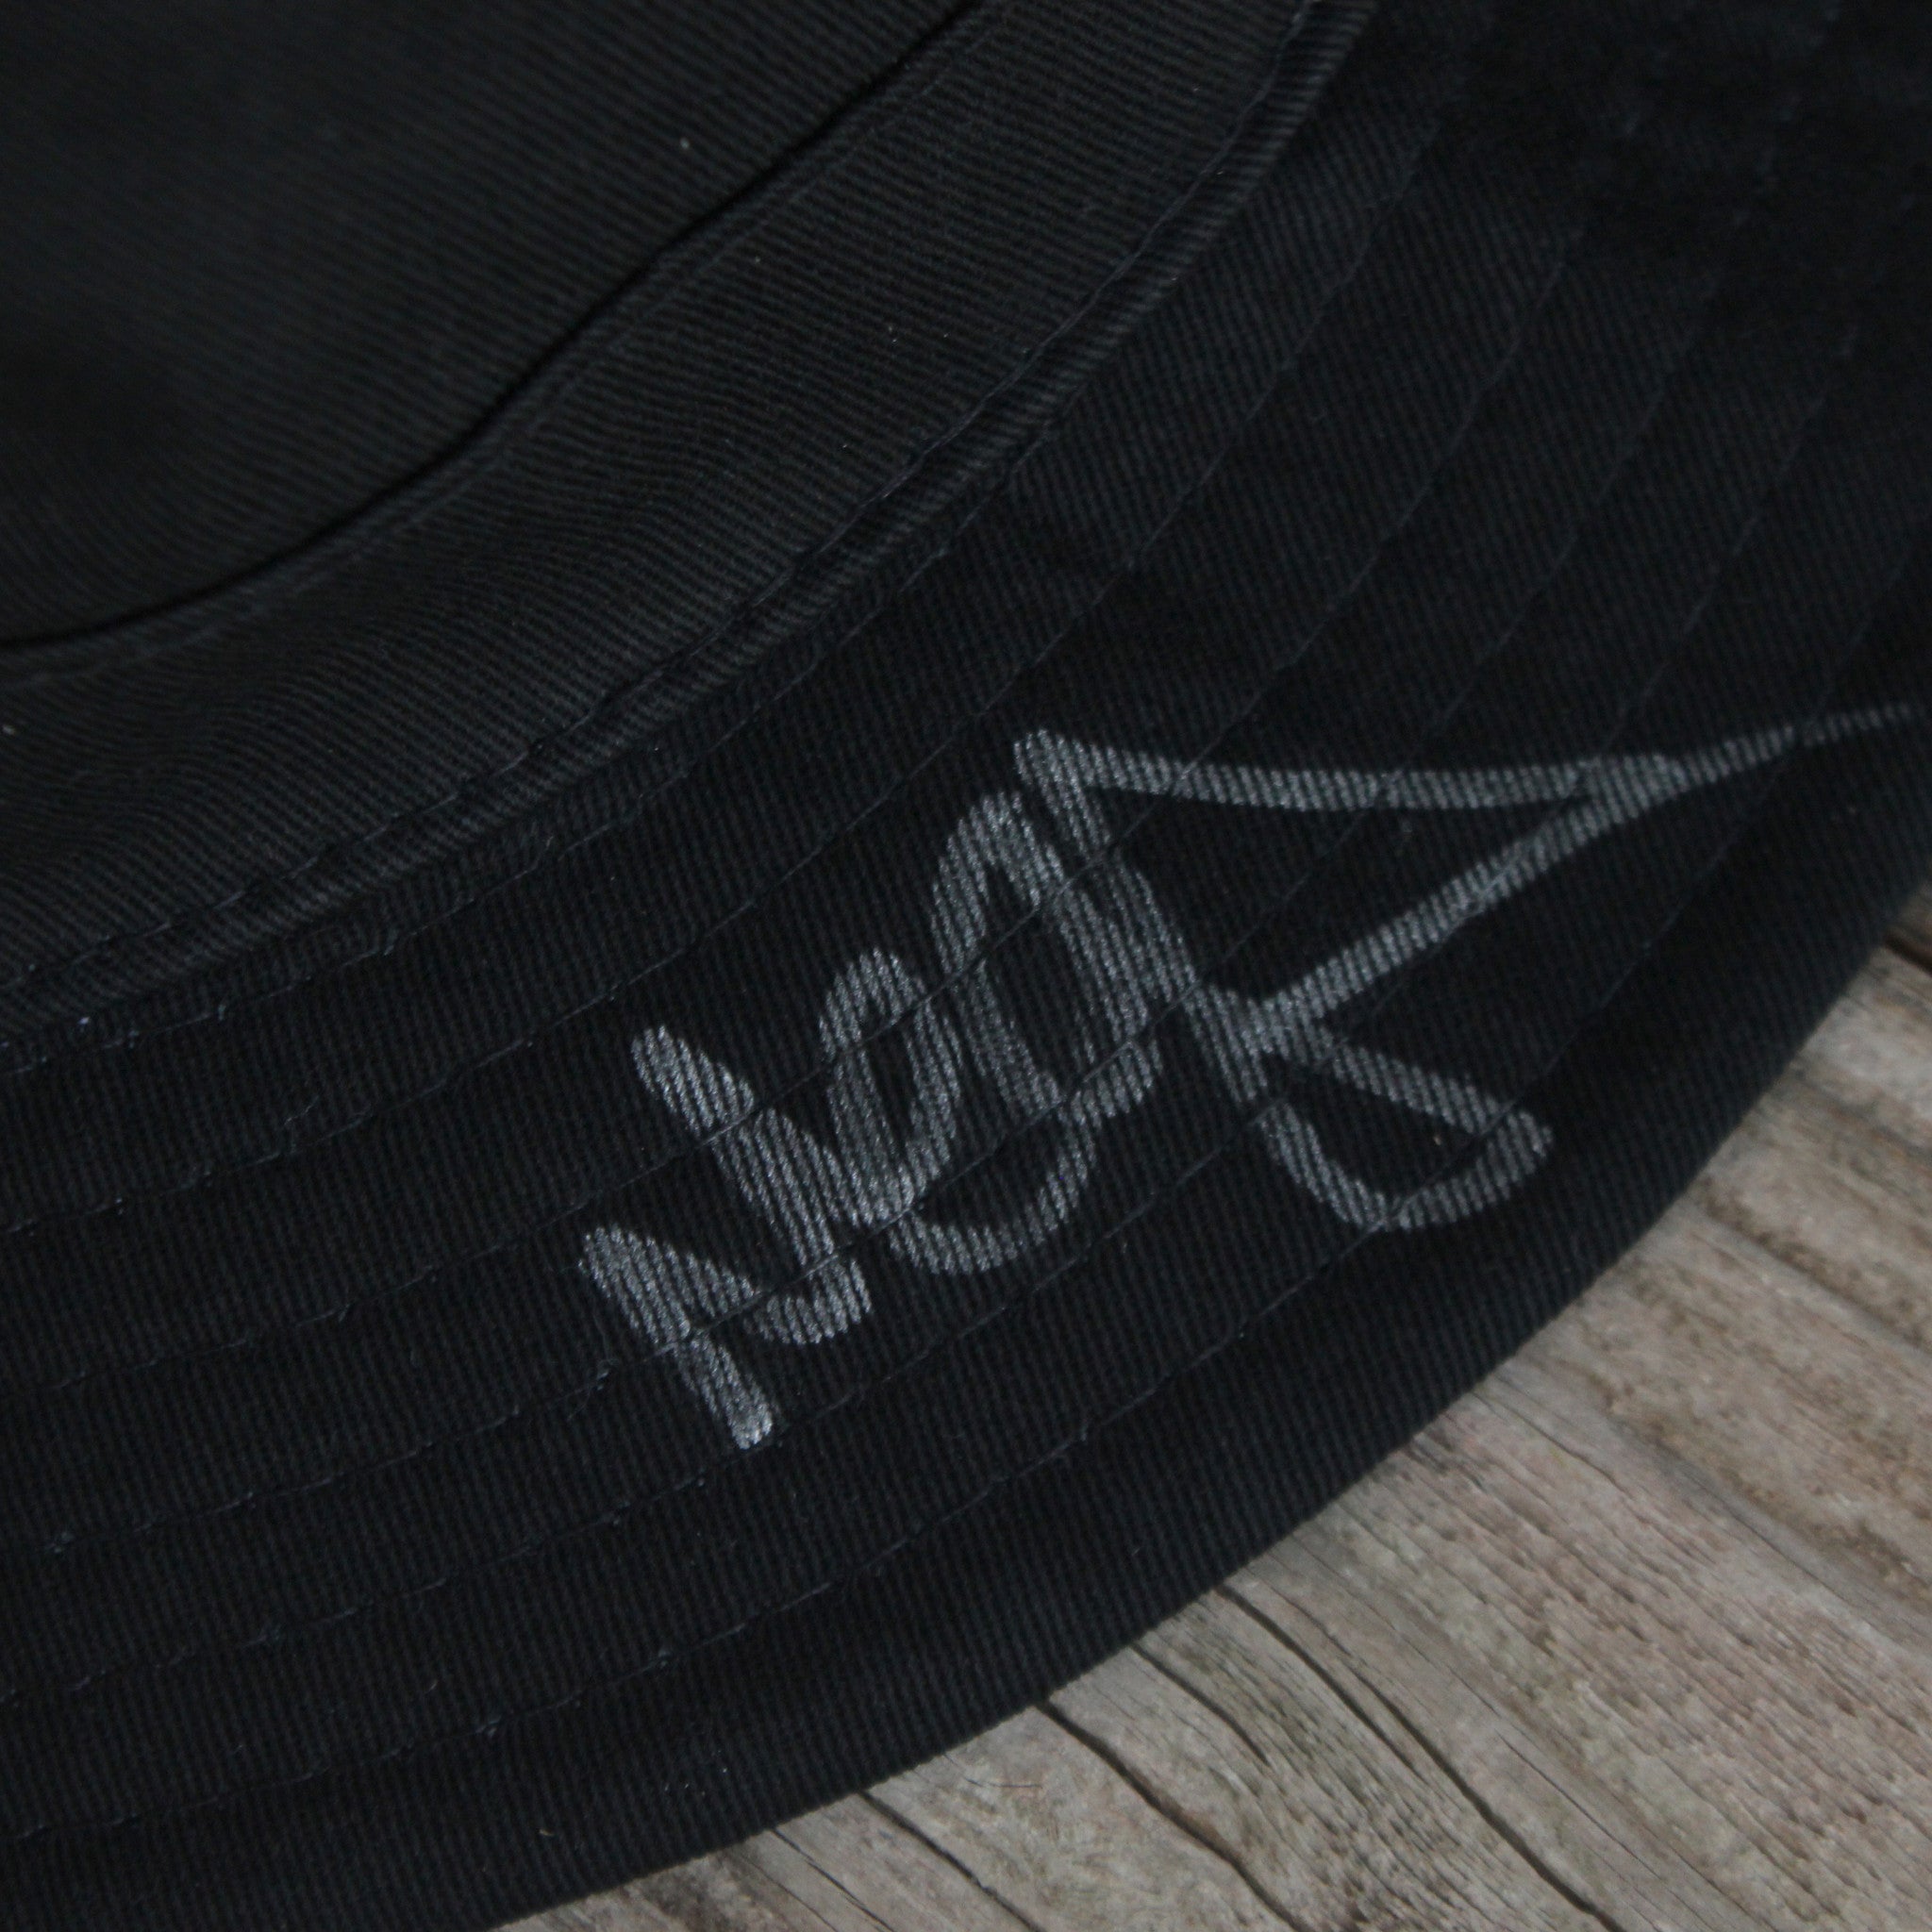 The Realness Bucket Hat Signed by Cormega - 4